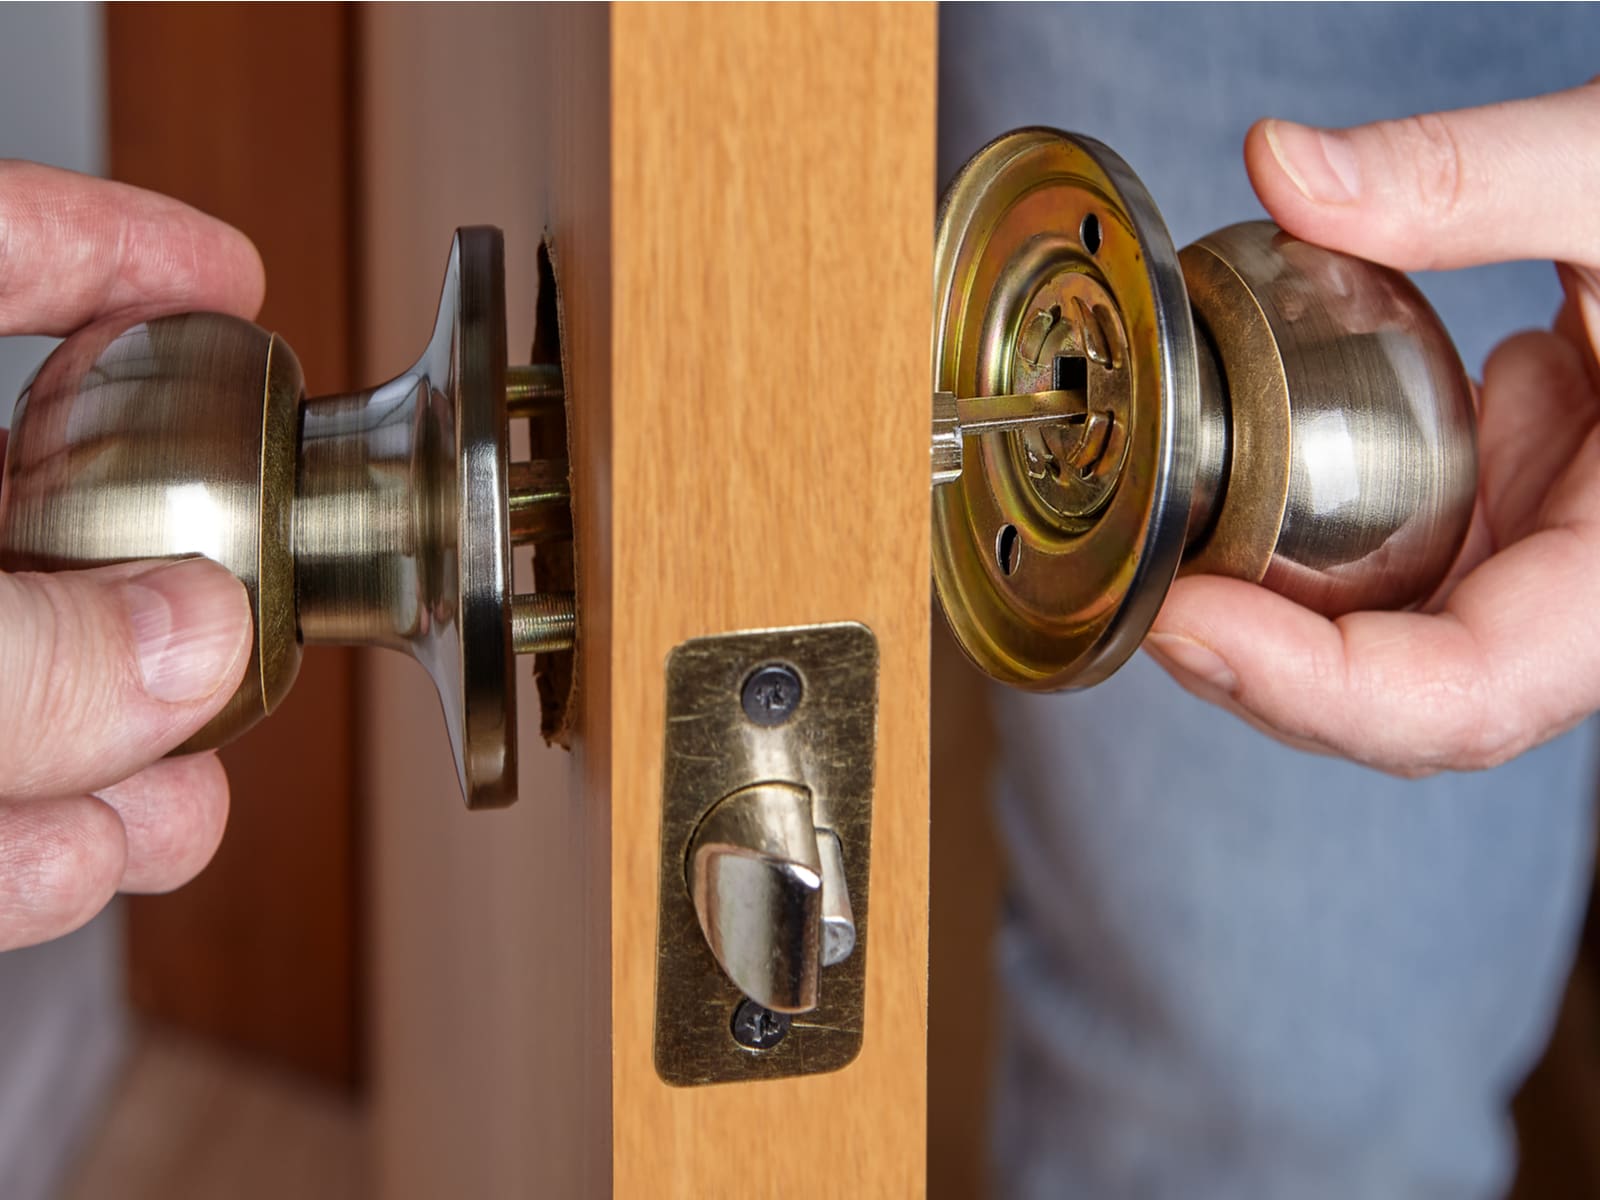 Two sides of a doorknob for a piece on how to unlock bathroom doorknob lock with a hole